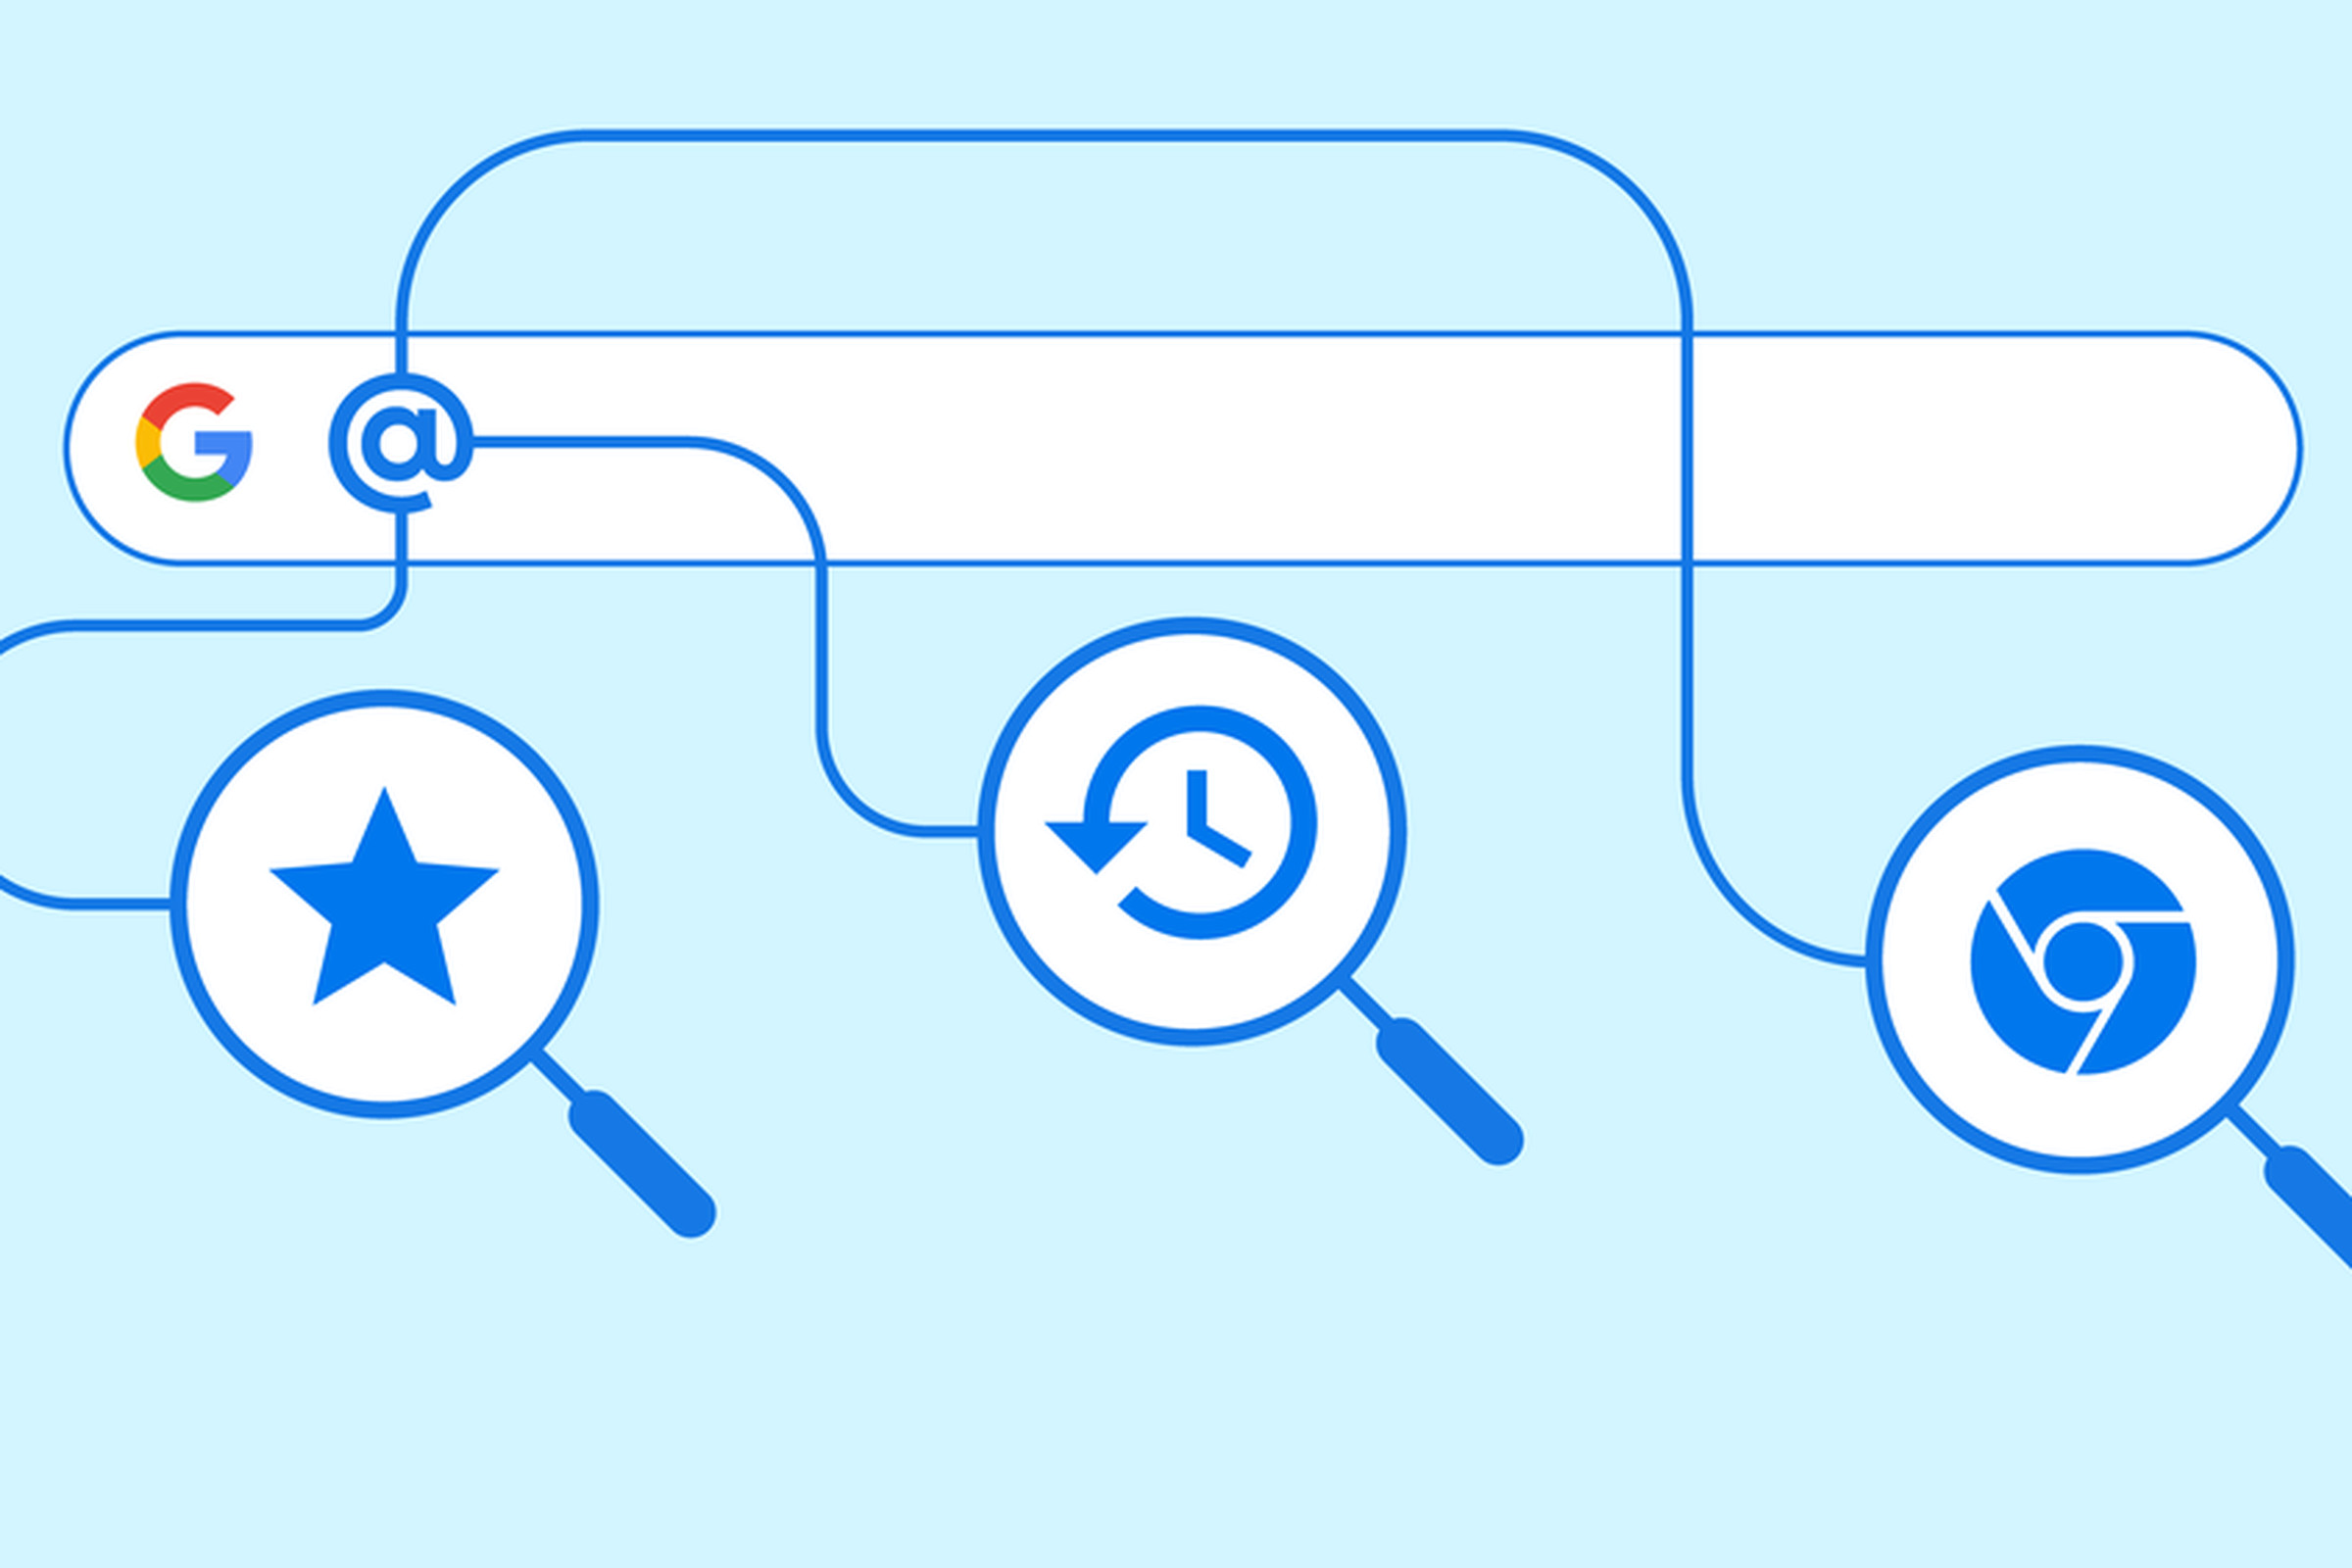 Google’s illustration visualizes the new shortcuts feature with a google search typing field that only as an “@” symbol along with three magnifying classes that have a favorites star, history clock, and chrome icon in them with lines going to the @ symbol in the field. Background is baby blue.